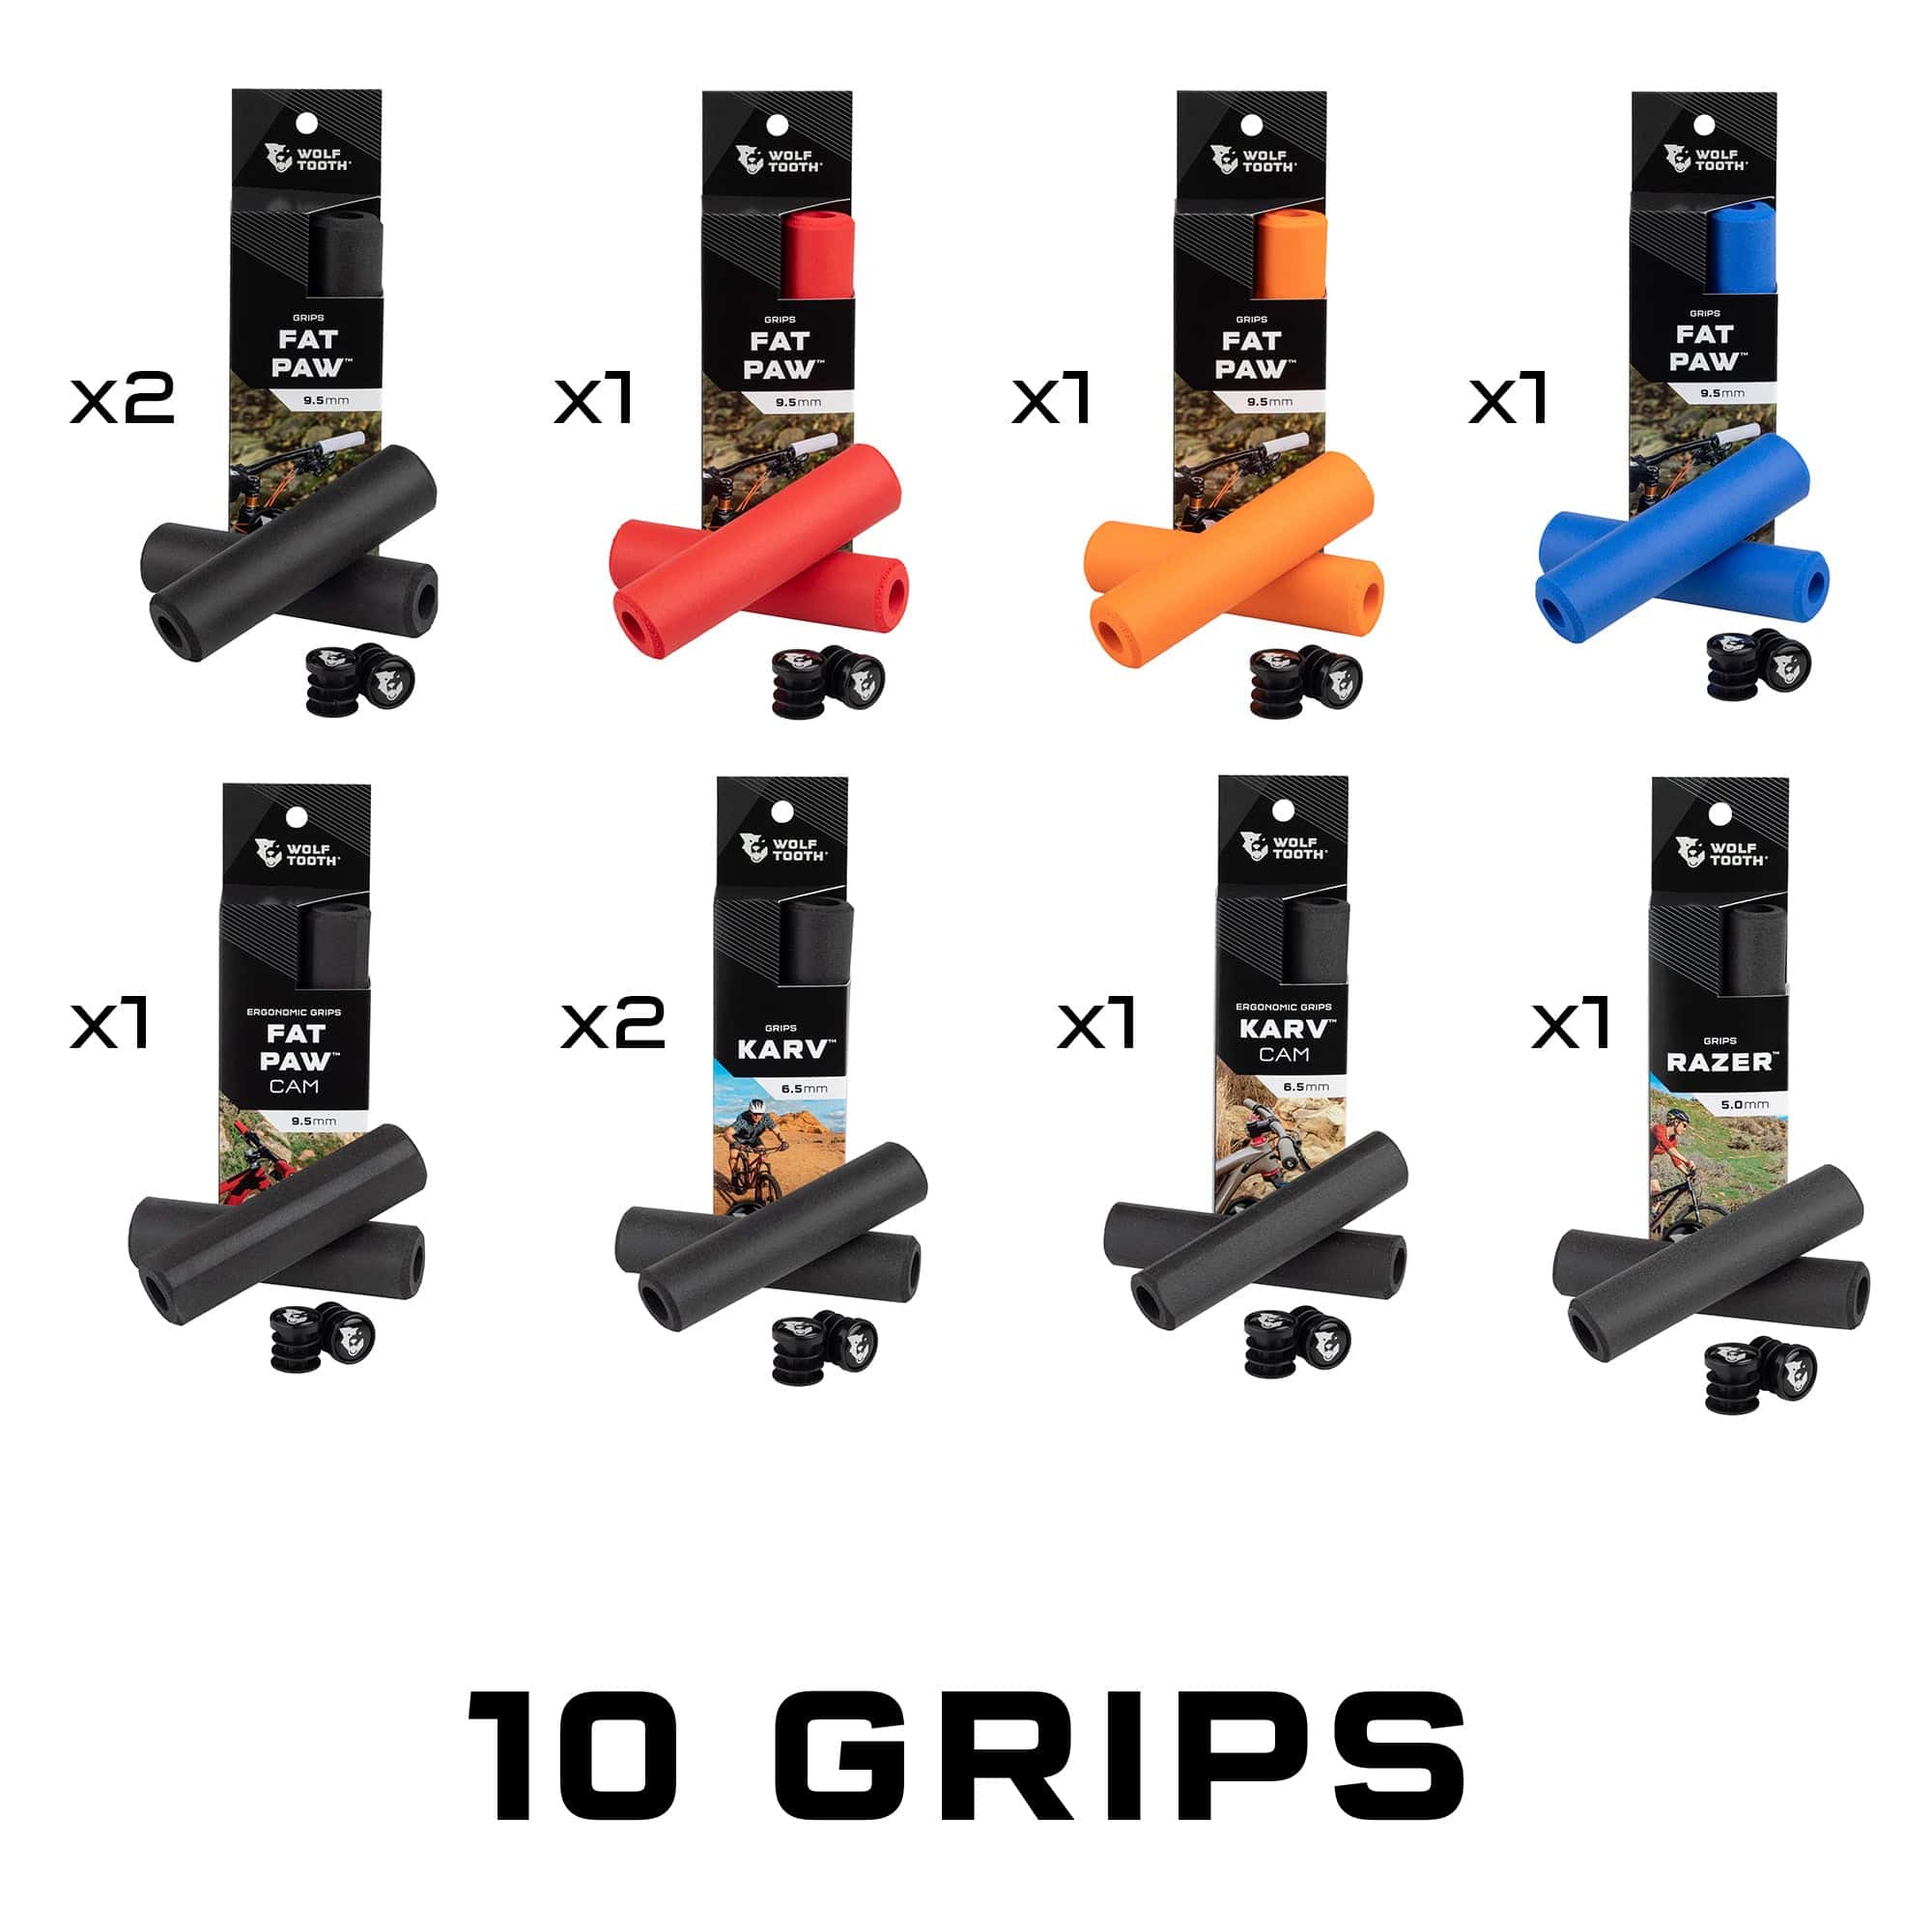 Silicone Grip Top Seller Bundle - Buy 9 sets and get 1 set for Free